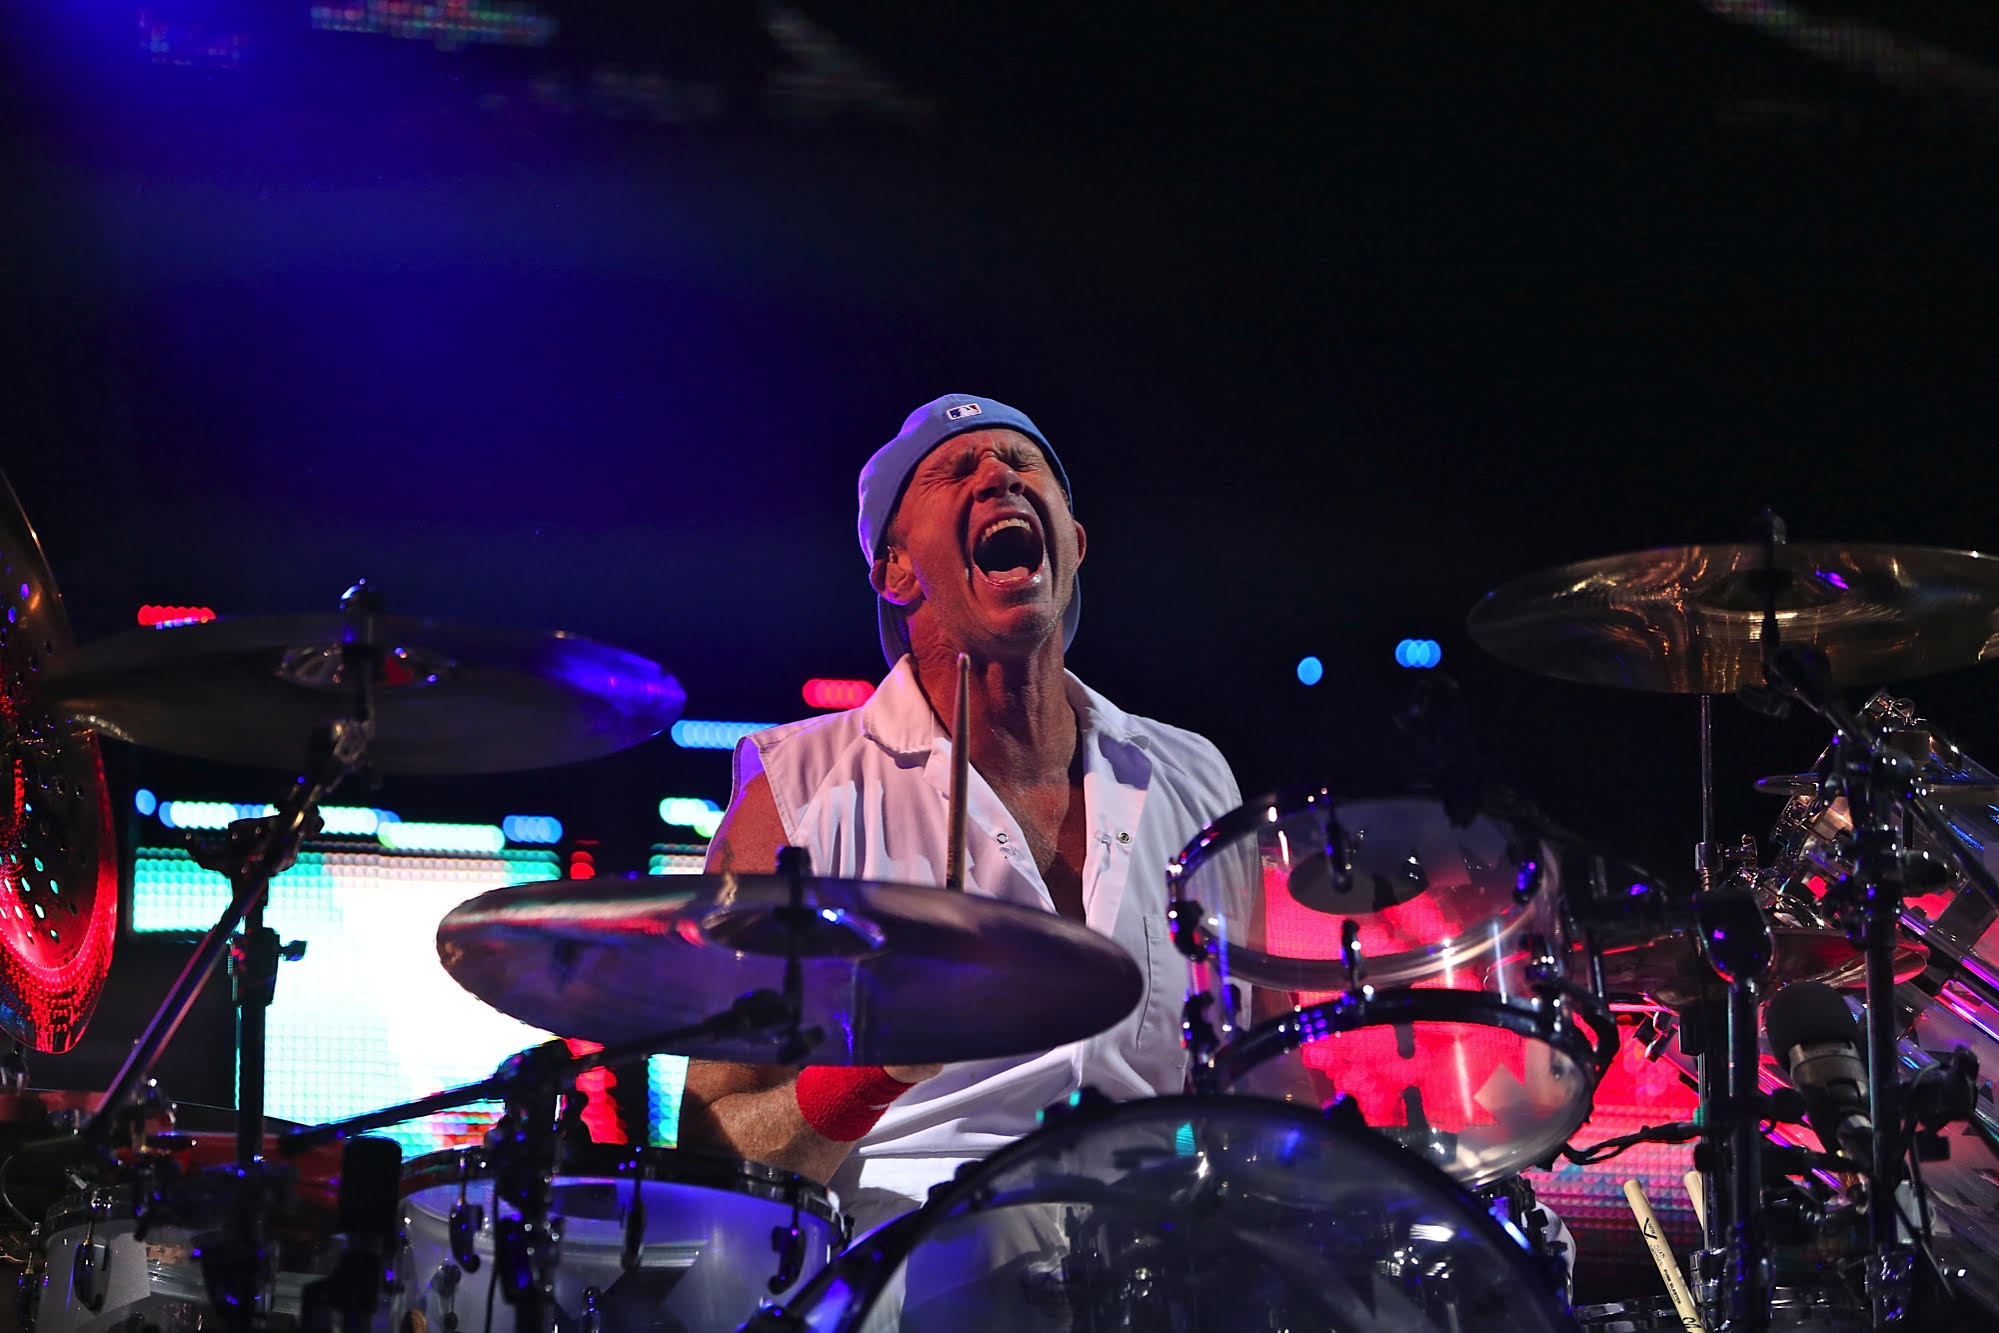 Chad Smith, Red Hot Chili Peppers, Trap Set Podcast, 2000x1340 HD Desktop